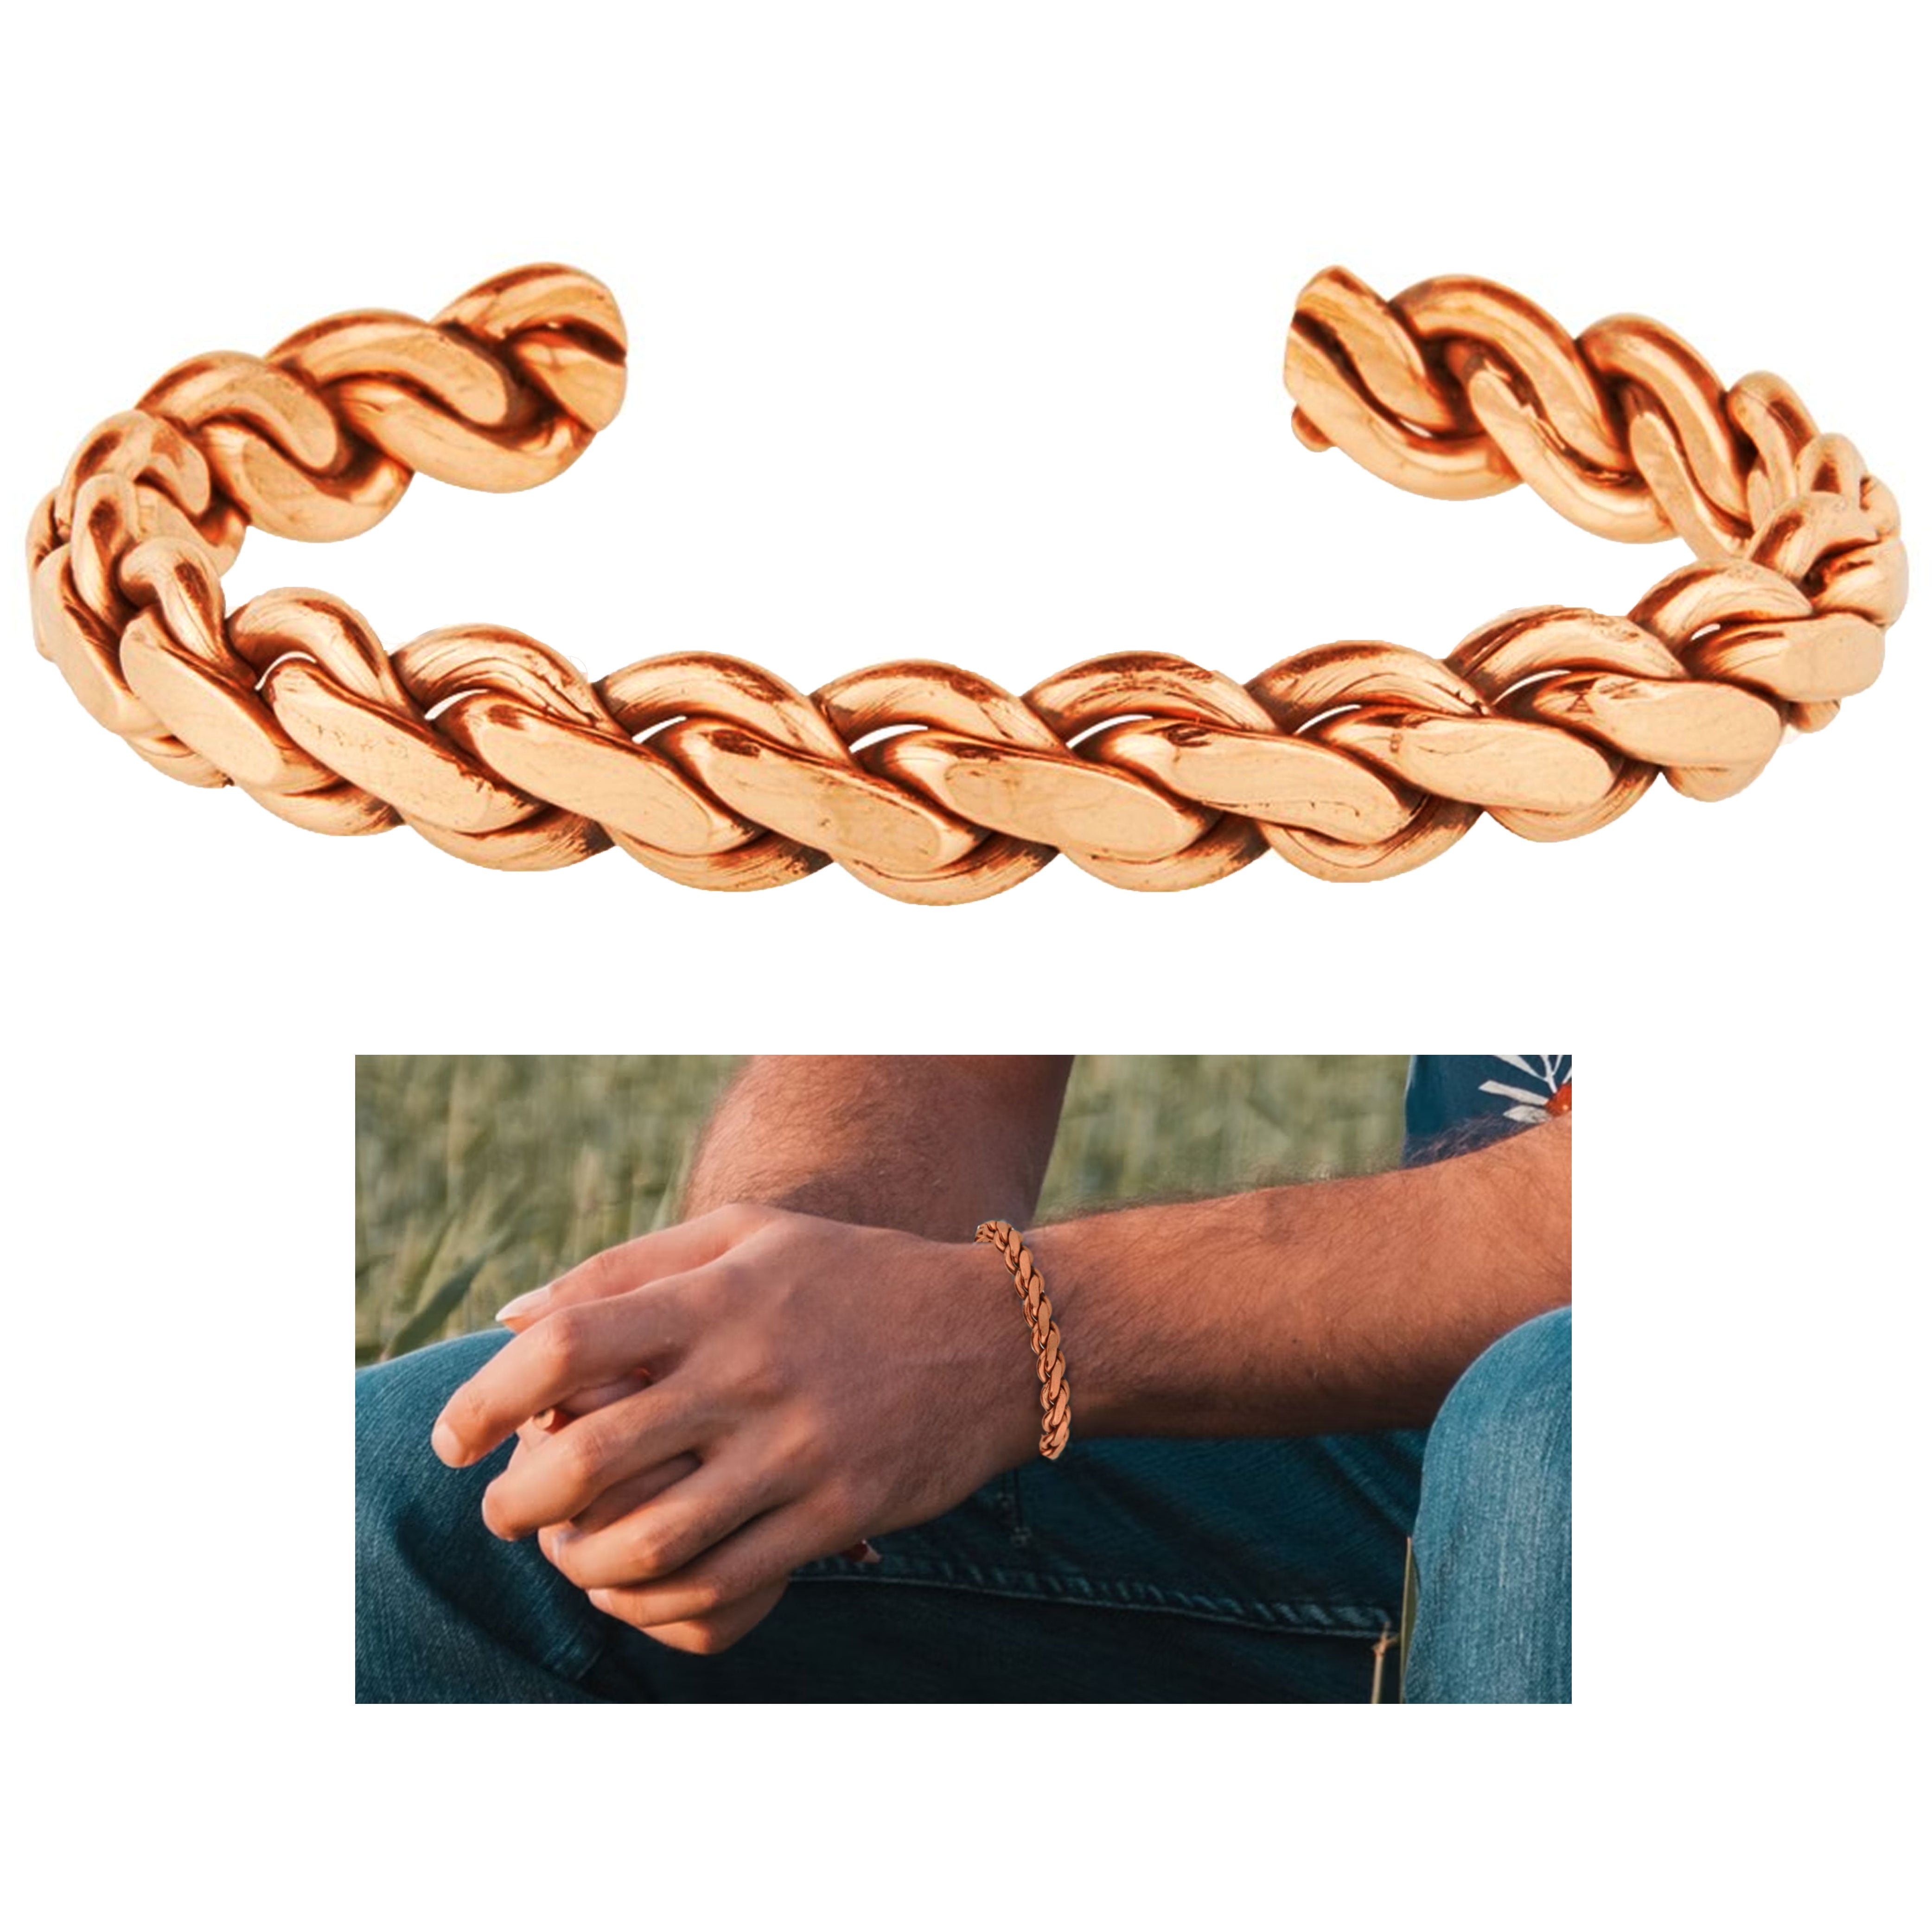 Magnetic Pure Copper Arthritis Therapy Bracelet - Buy CBD Cannabis Oils &  Capsules Online - Healthy Remedy